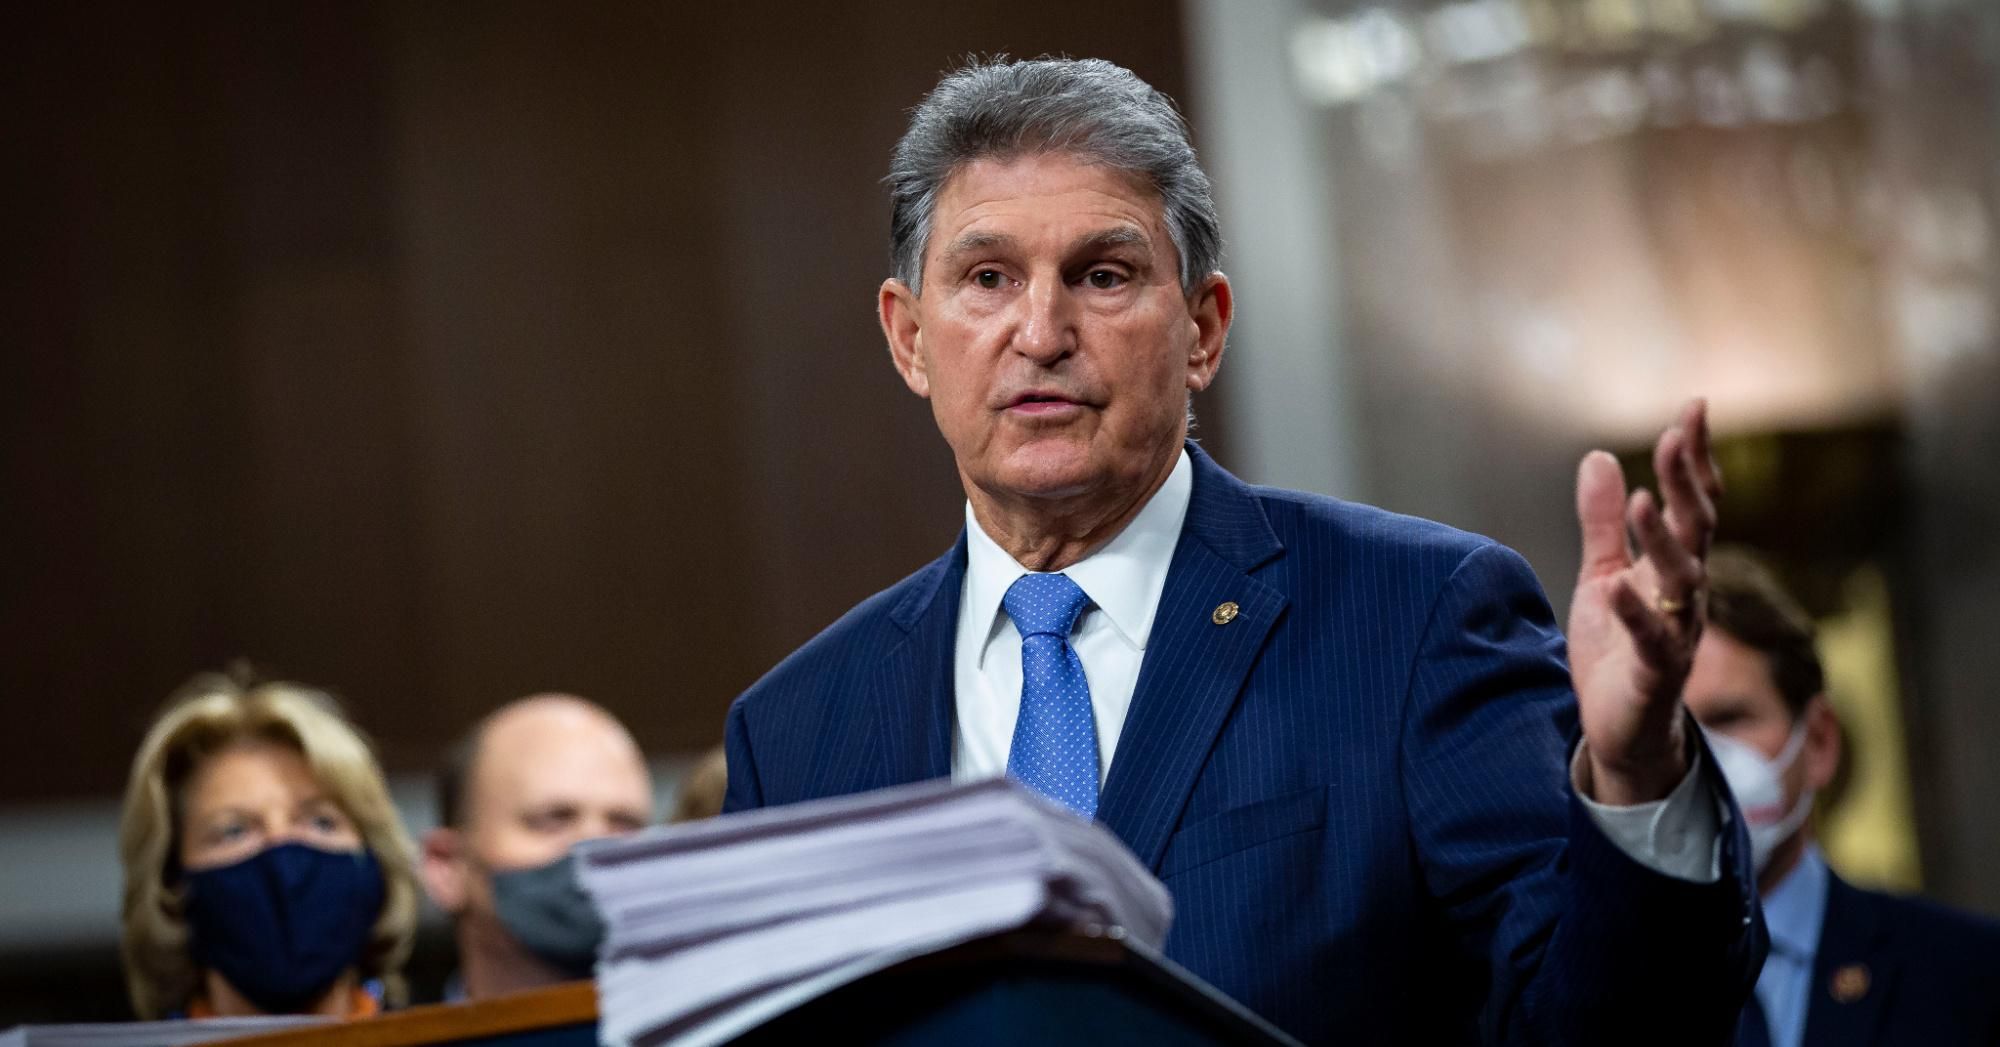 Sen. Joe Manchin (D-W.Va.) speaks during a news conference with a bipartisan group of lawmakers on December 14, 2020 in Washington, D.C.